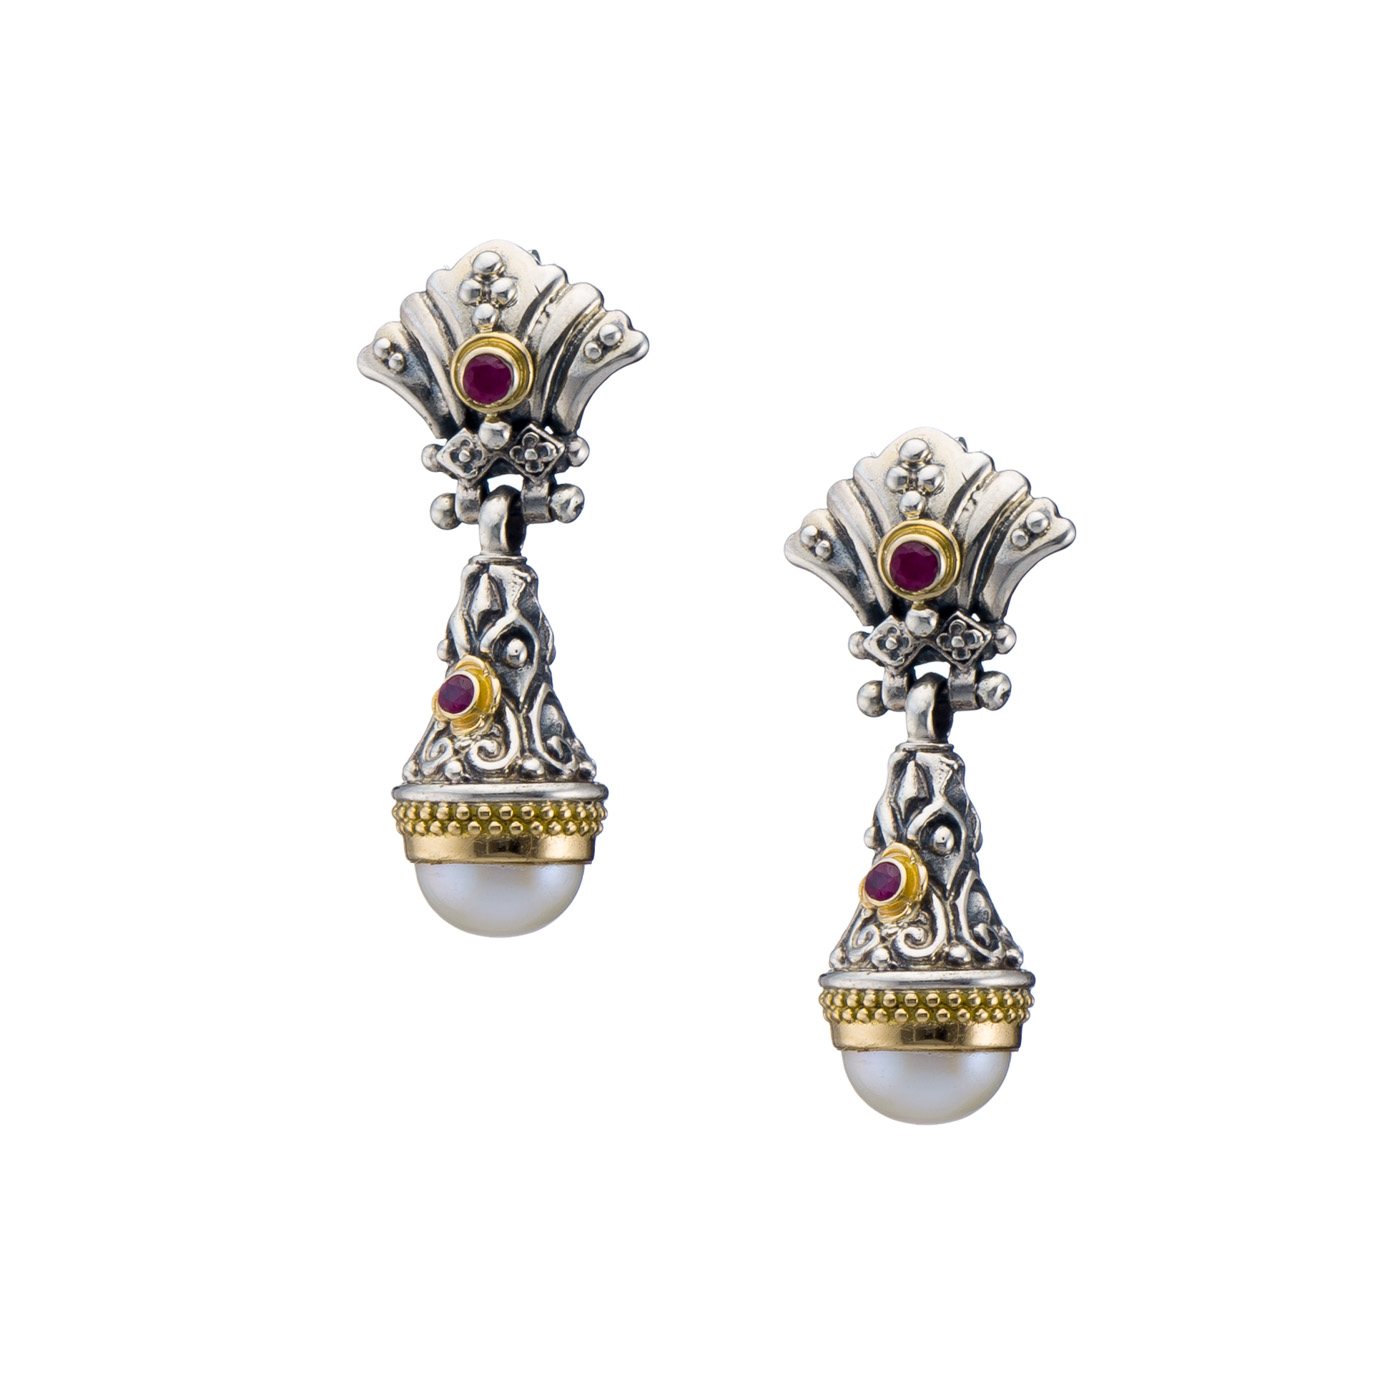 Santorini drop earrings in 18K Gold and Sterling Silver with pearls